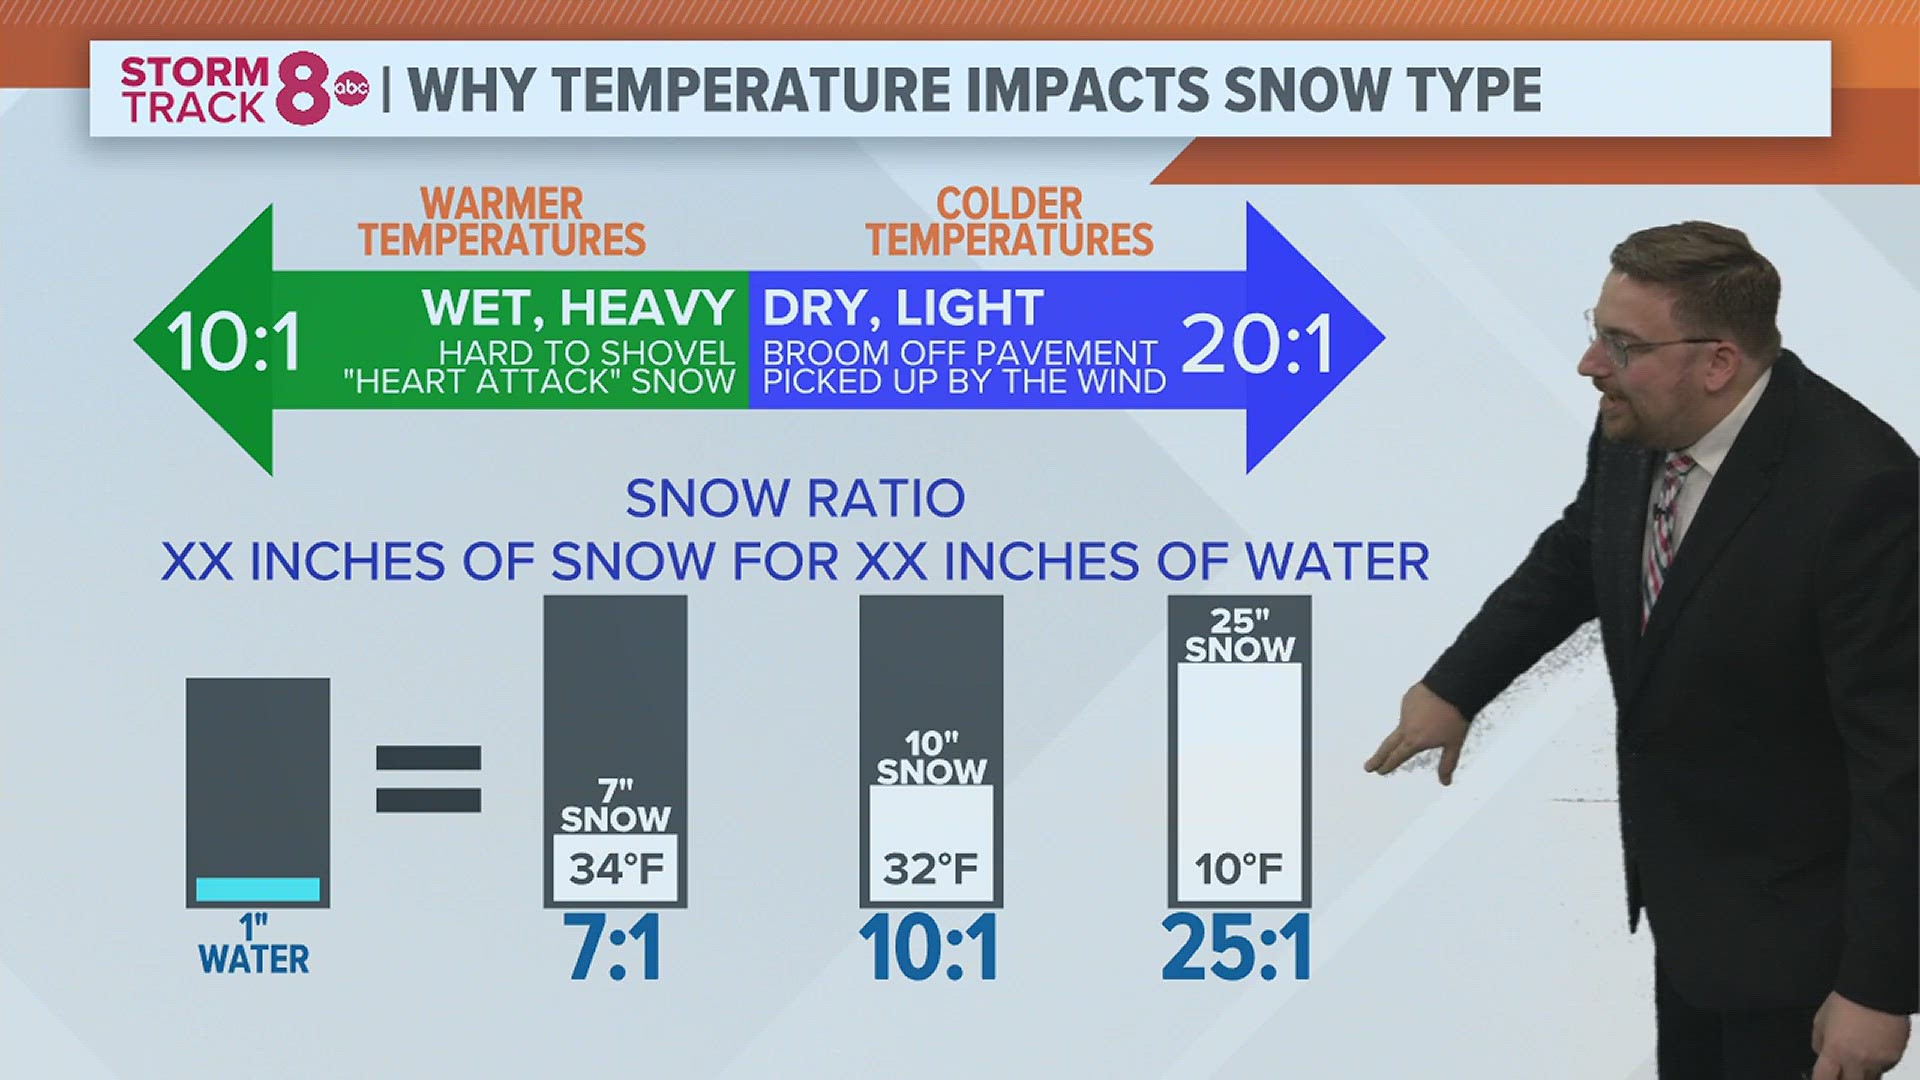 Not only can the track of a winter storm influence how much snow it produces, but the temperature can, too! Here's why.